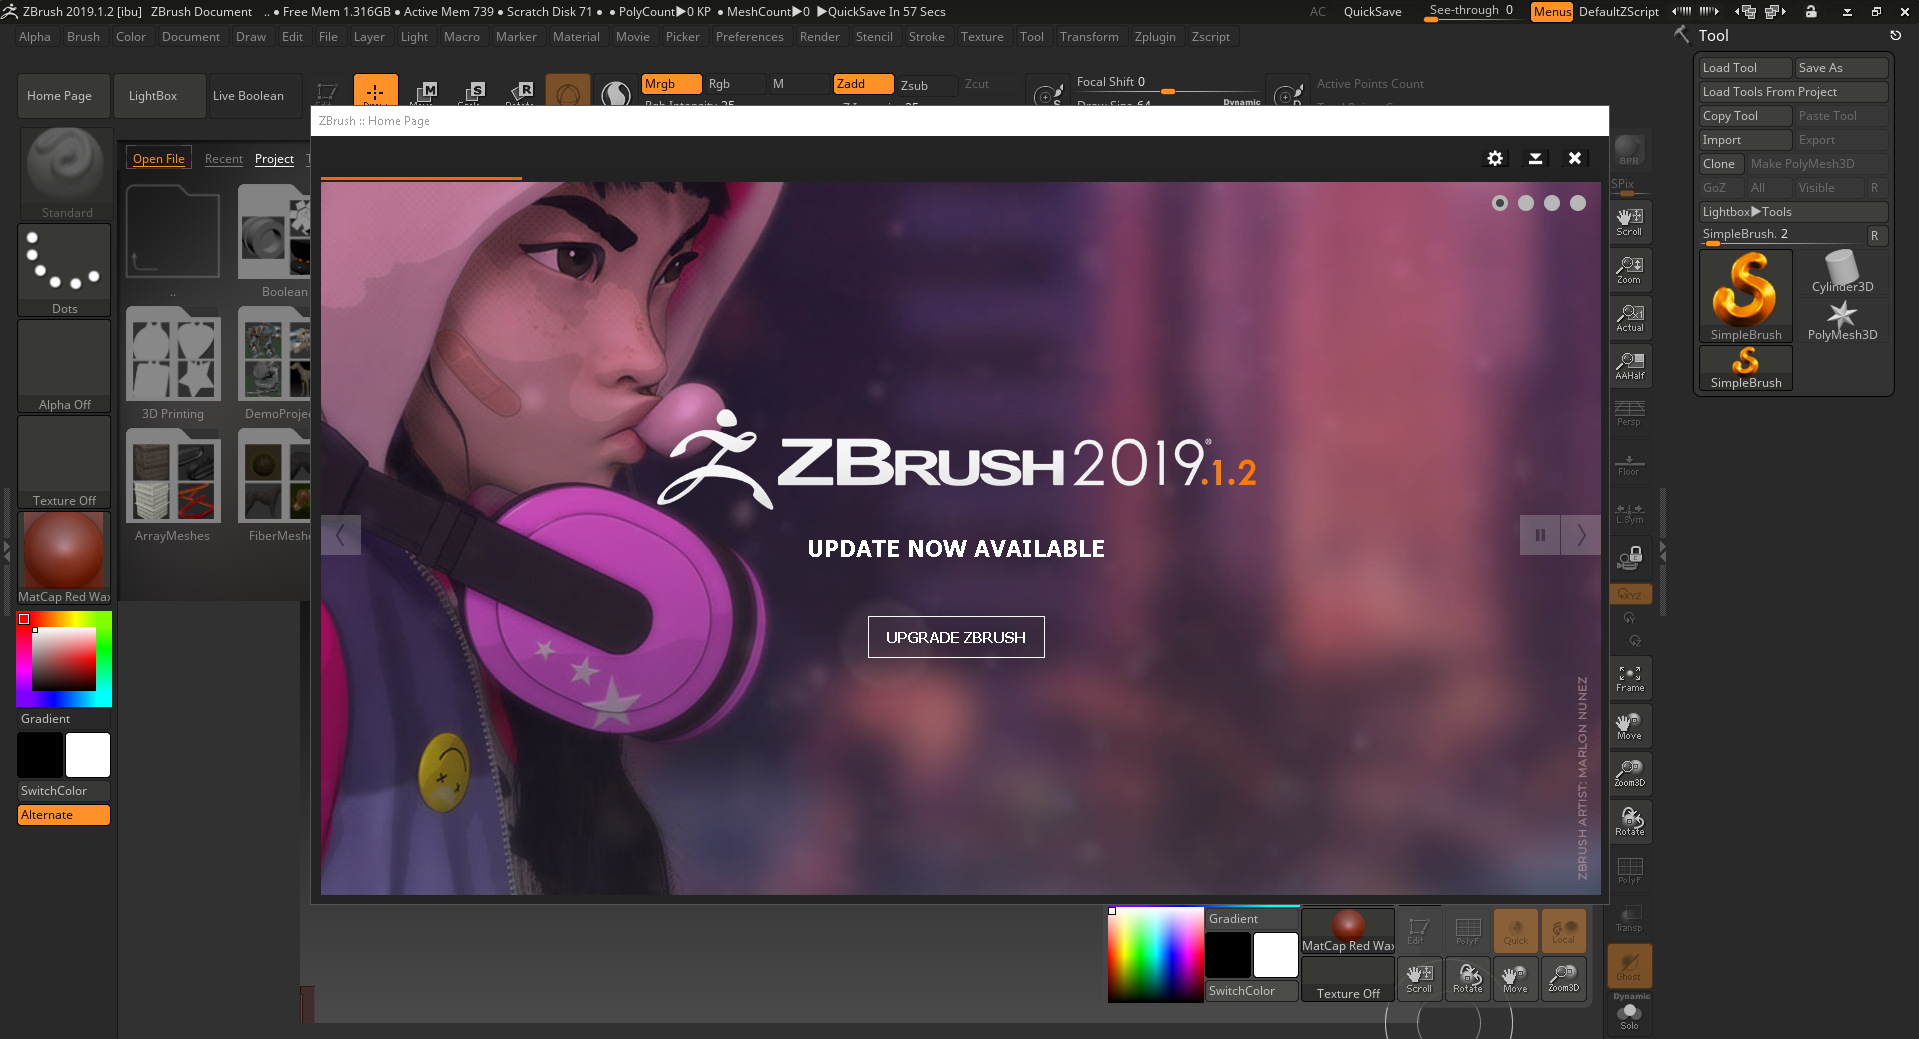 new tools in zbrush 2019.1.2